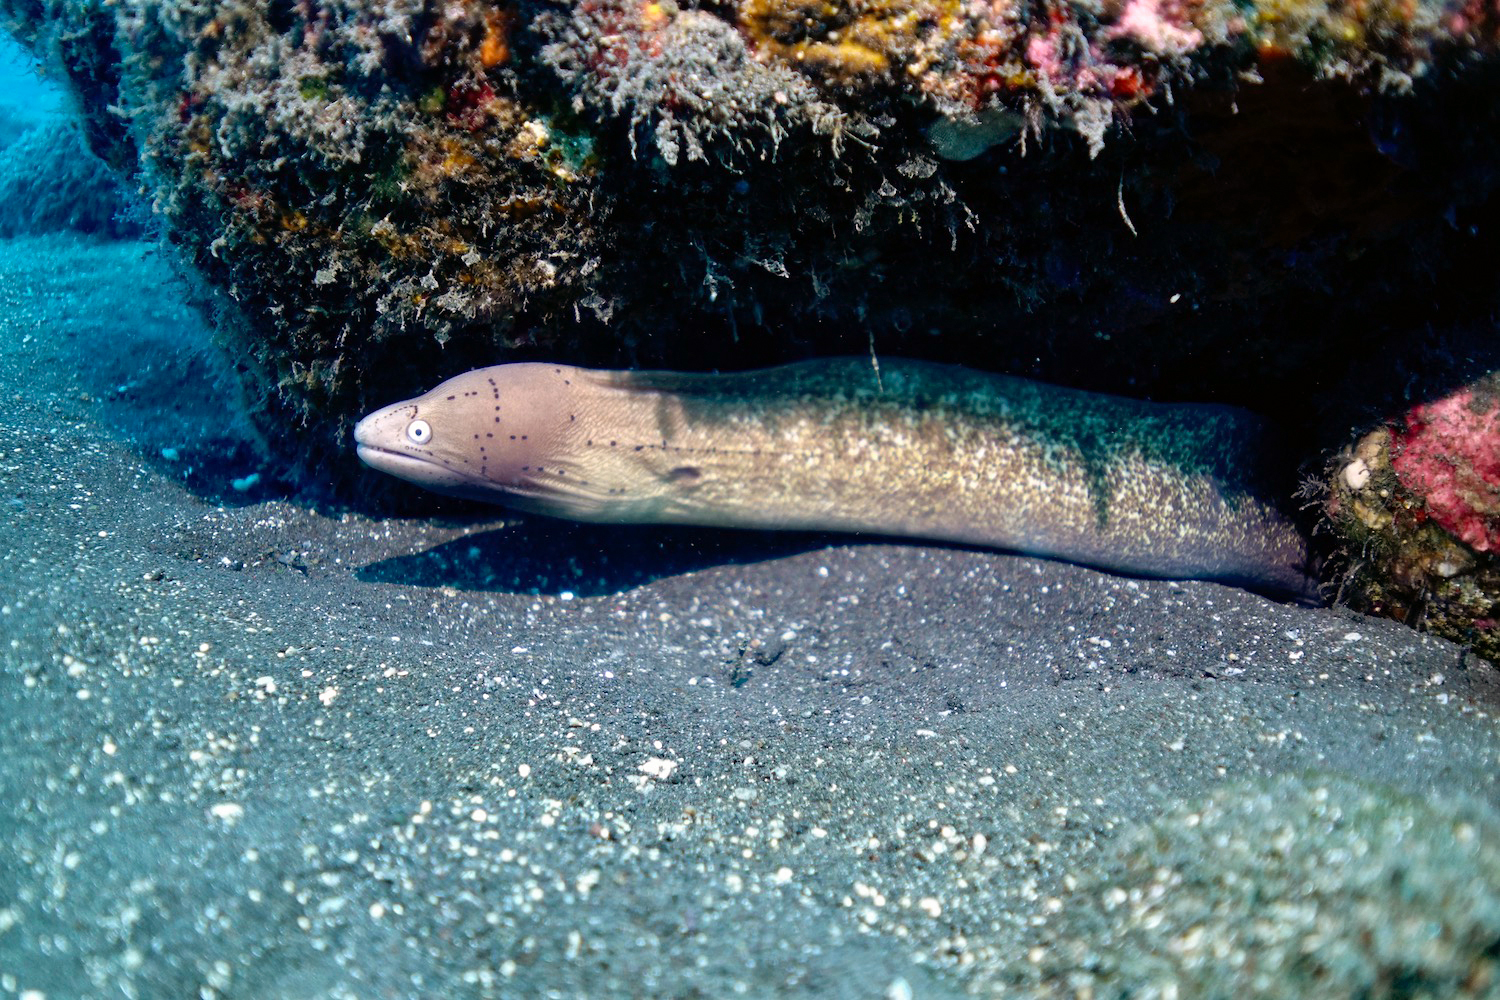 Geometric or grey moray at Les Douanes